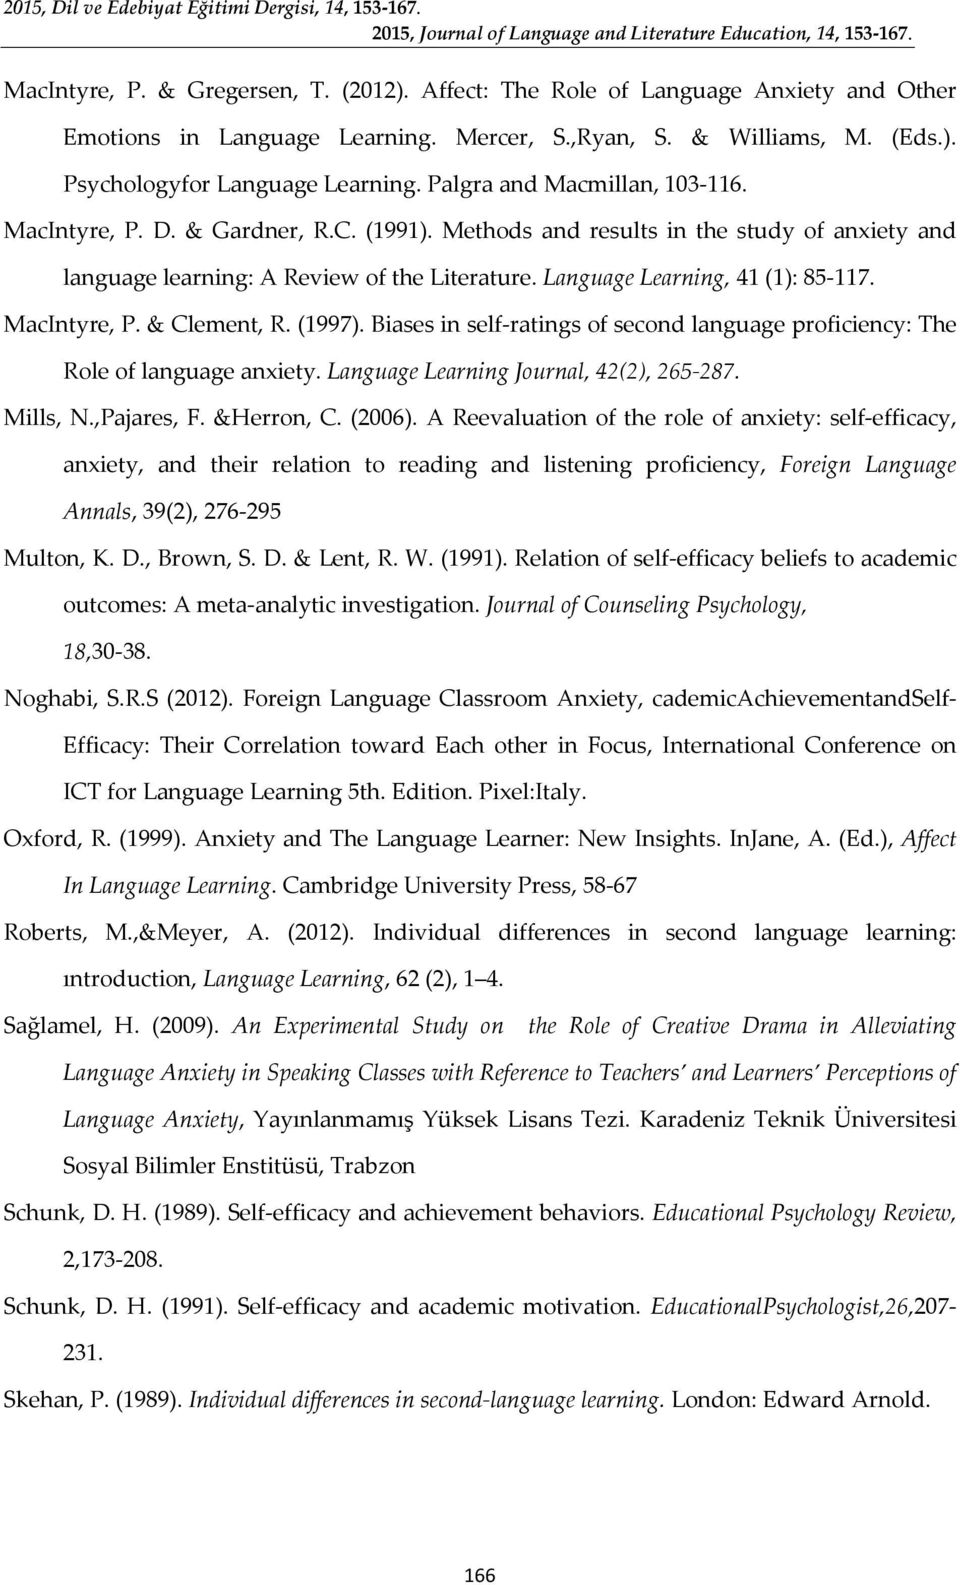 Language Learning, 41 (1): 85-117. MacIntyre, P. & Clement, R. (1997). Biases in self-ratings of second language proficiency: The Role of language anxiety. Language Learning Journal, 42(2), 265-287.